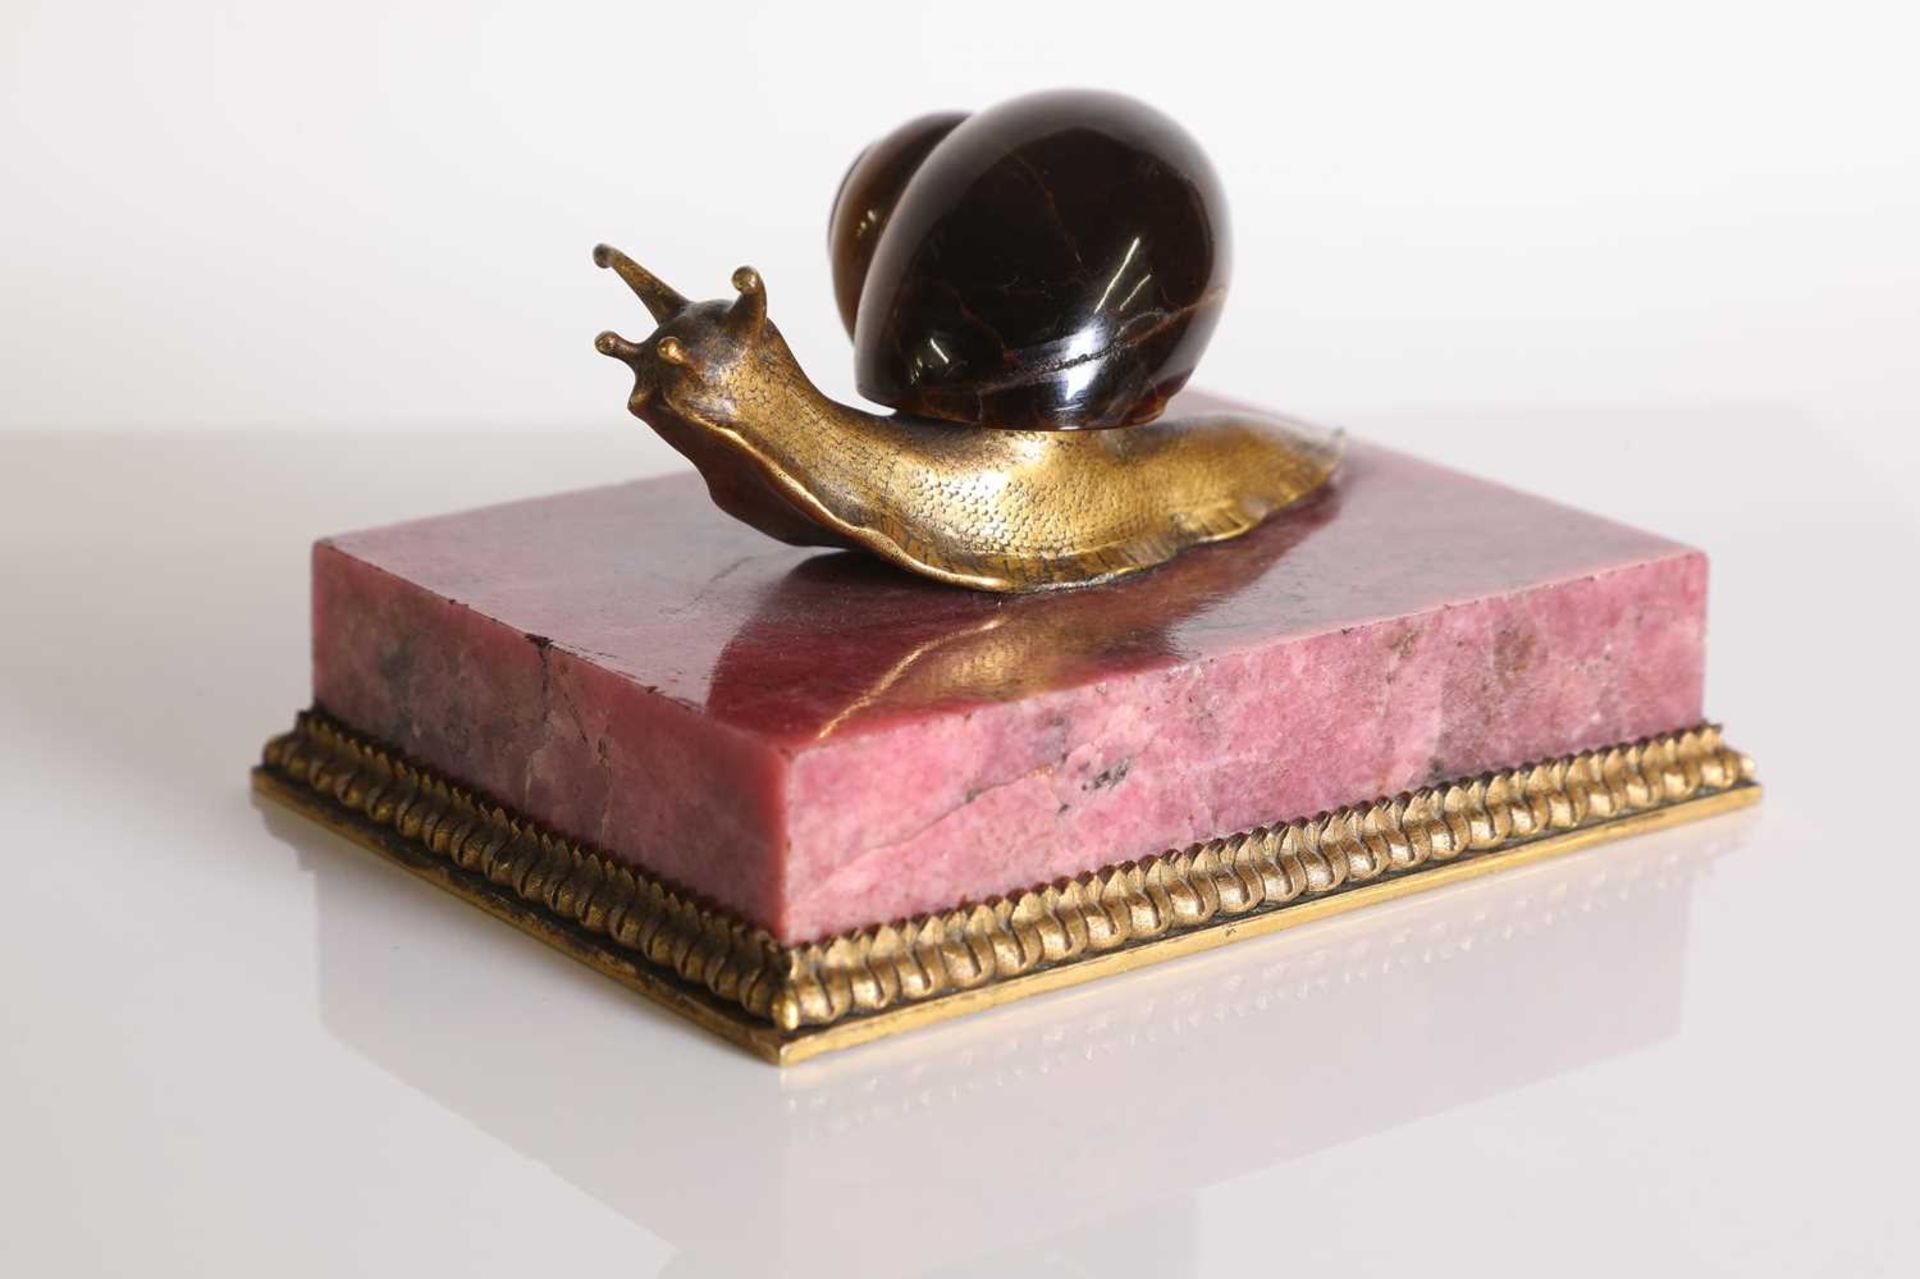 A tiger's eye and ormolu snail, - Image 14 of 25